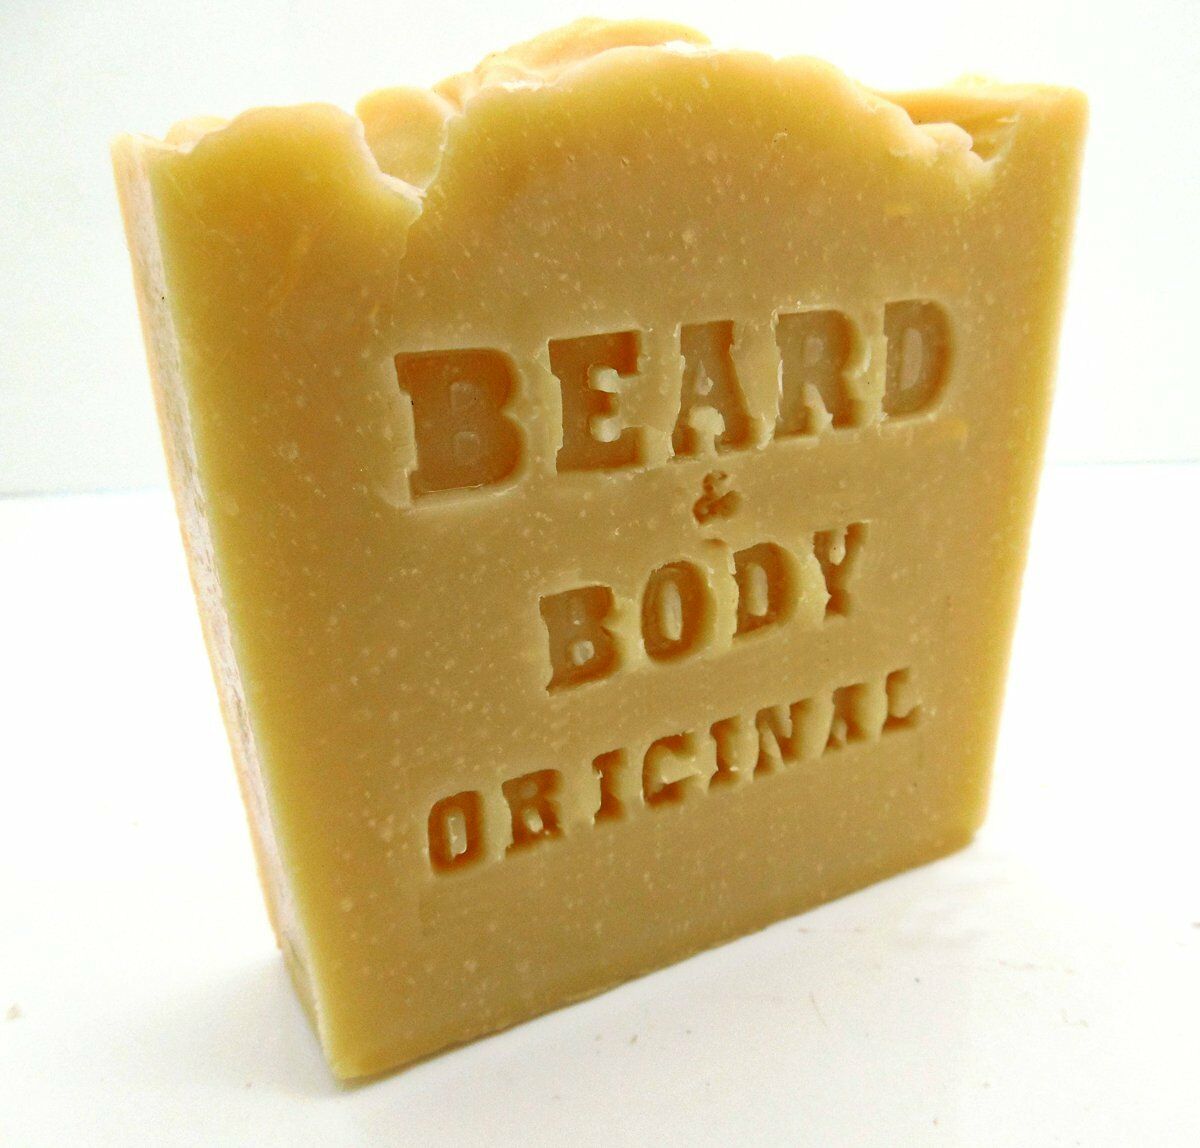 Original Beard And Body Soap By Honest Amish